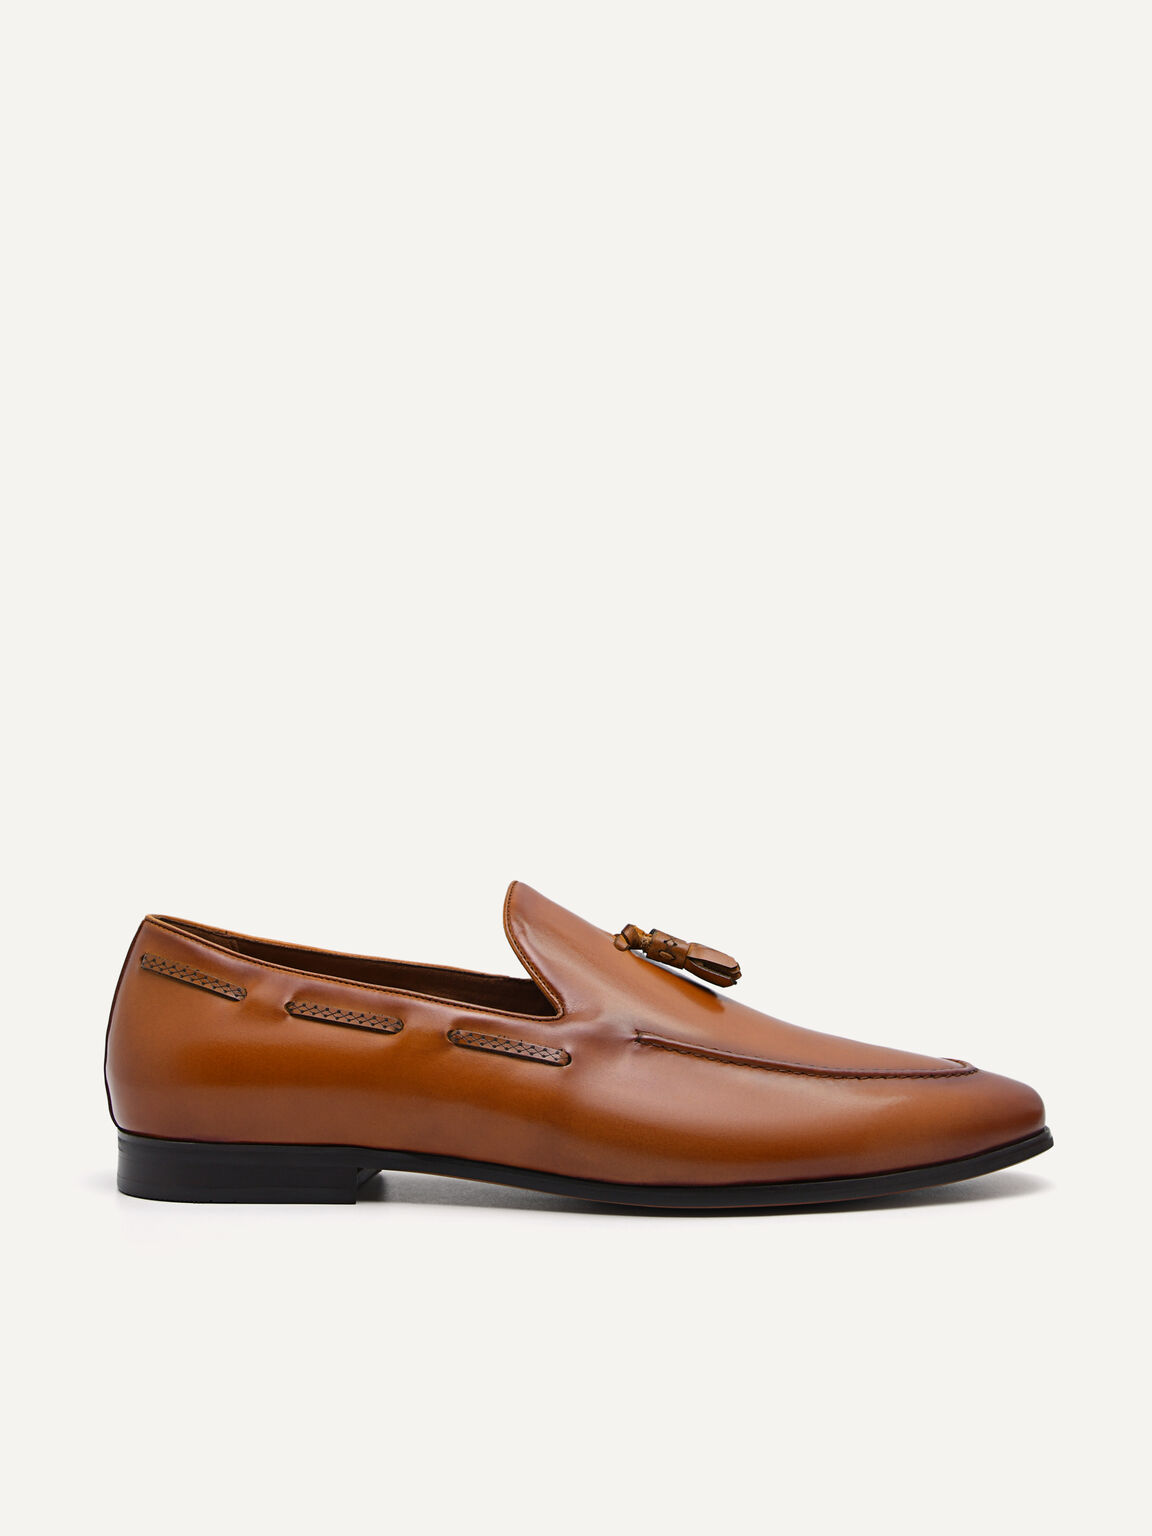 Leather Tasselled Loafers, Camel